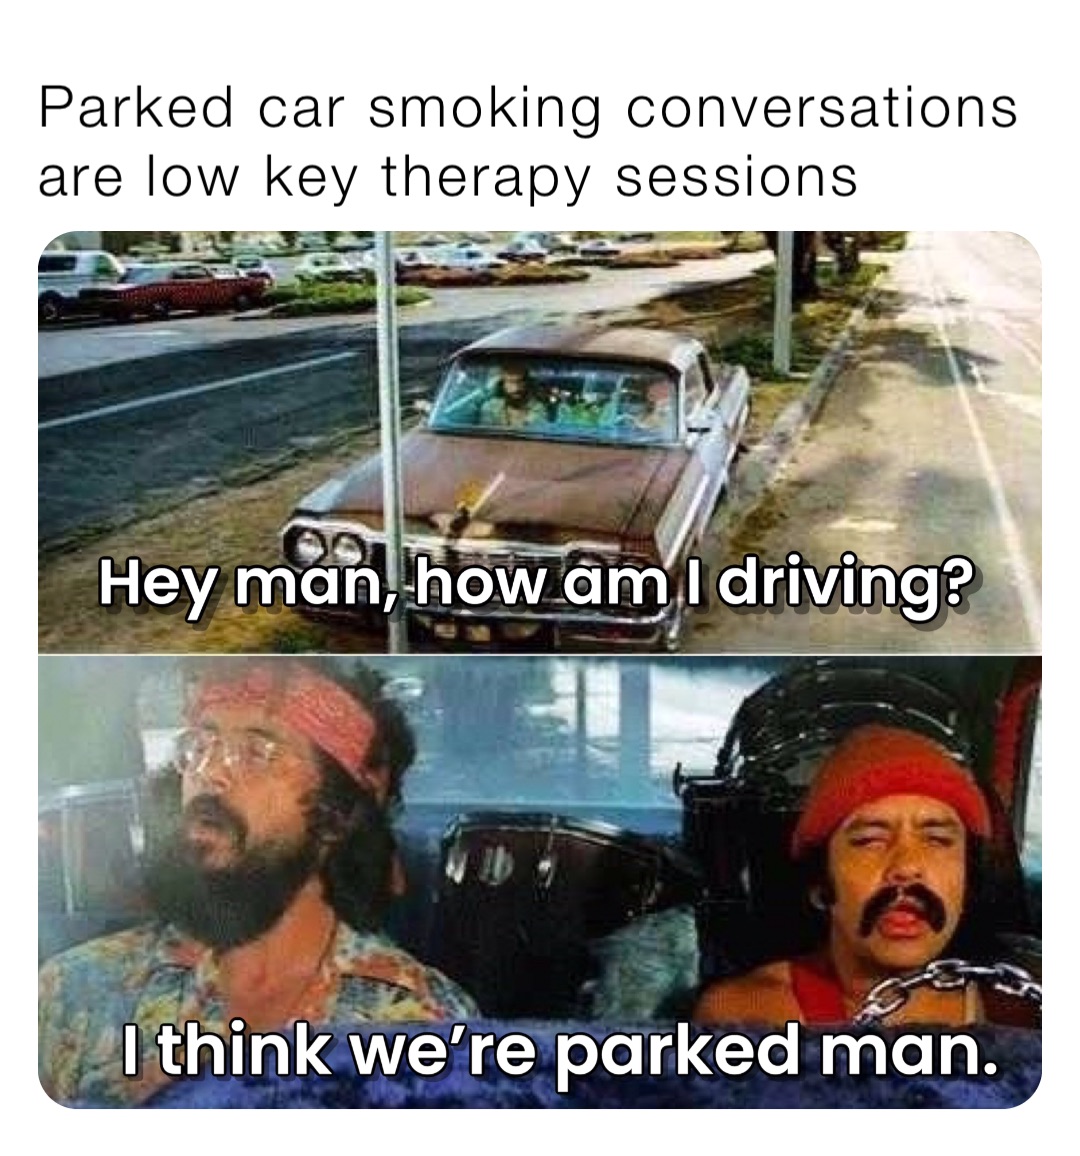 Parked car smoking conversations are low key therapy sessions ...